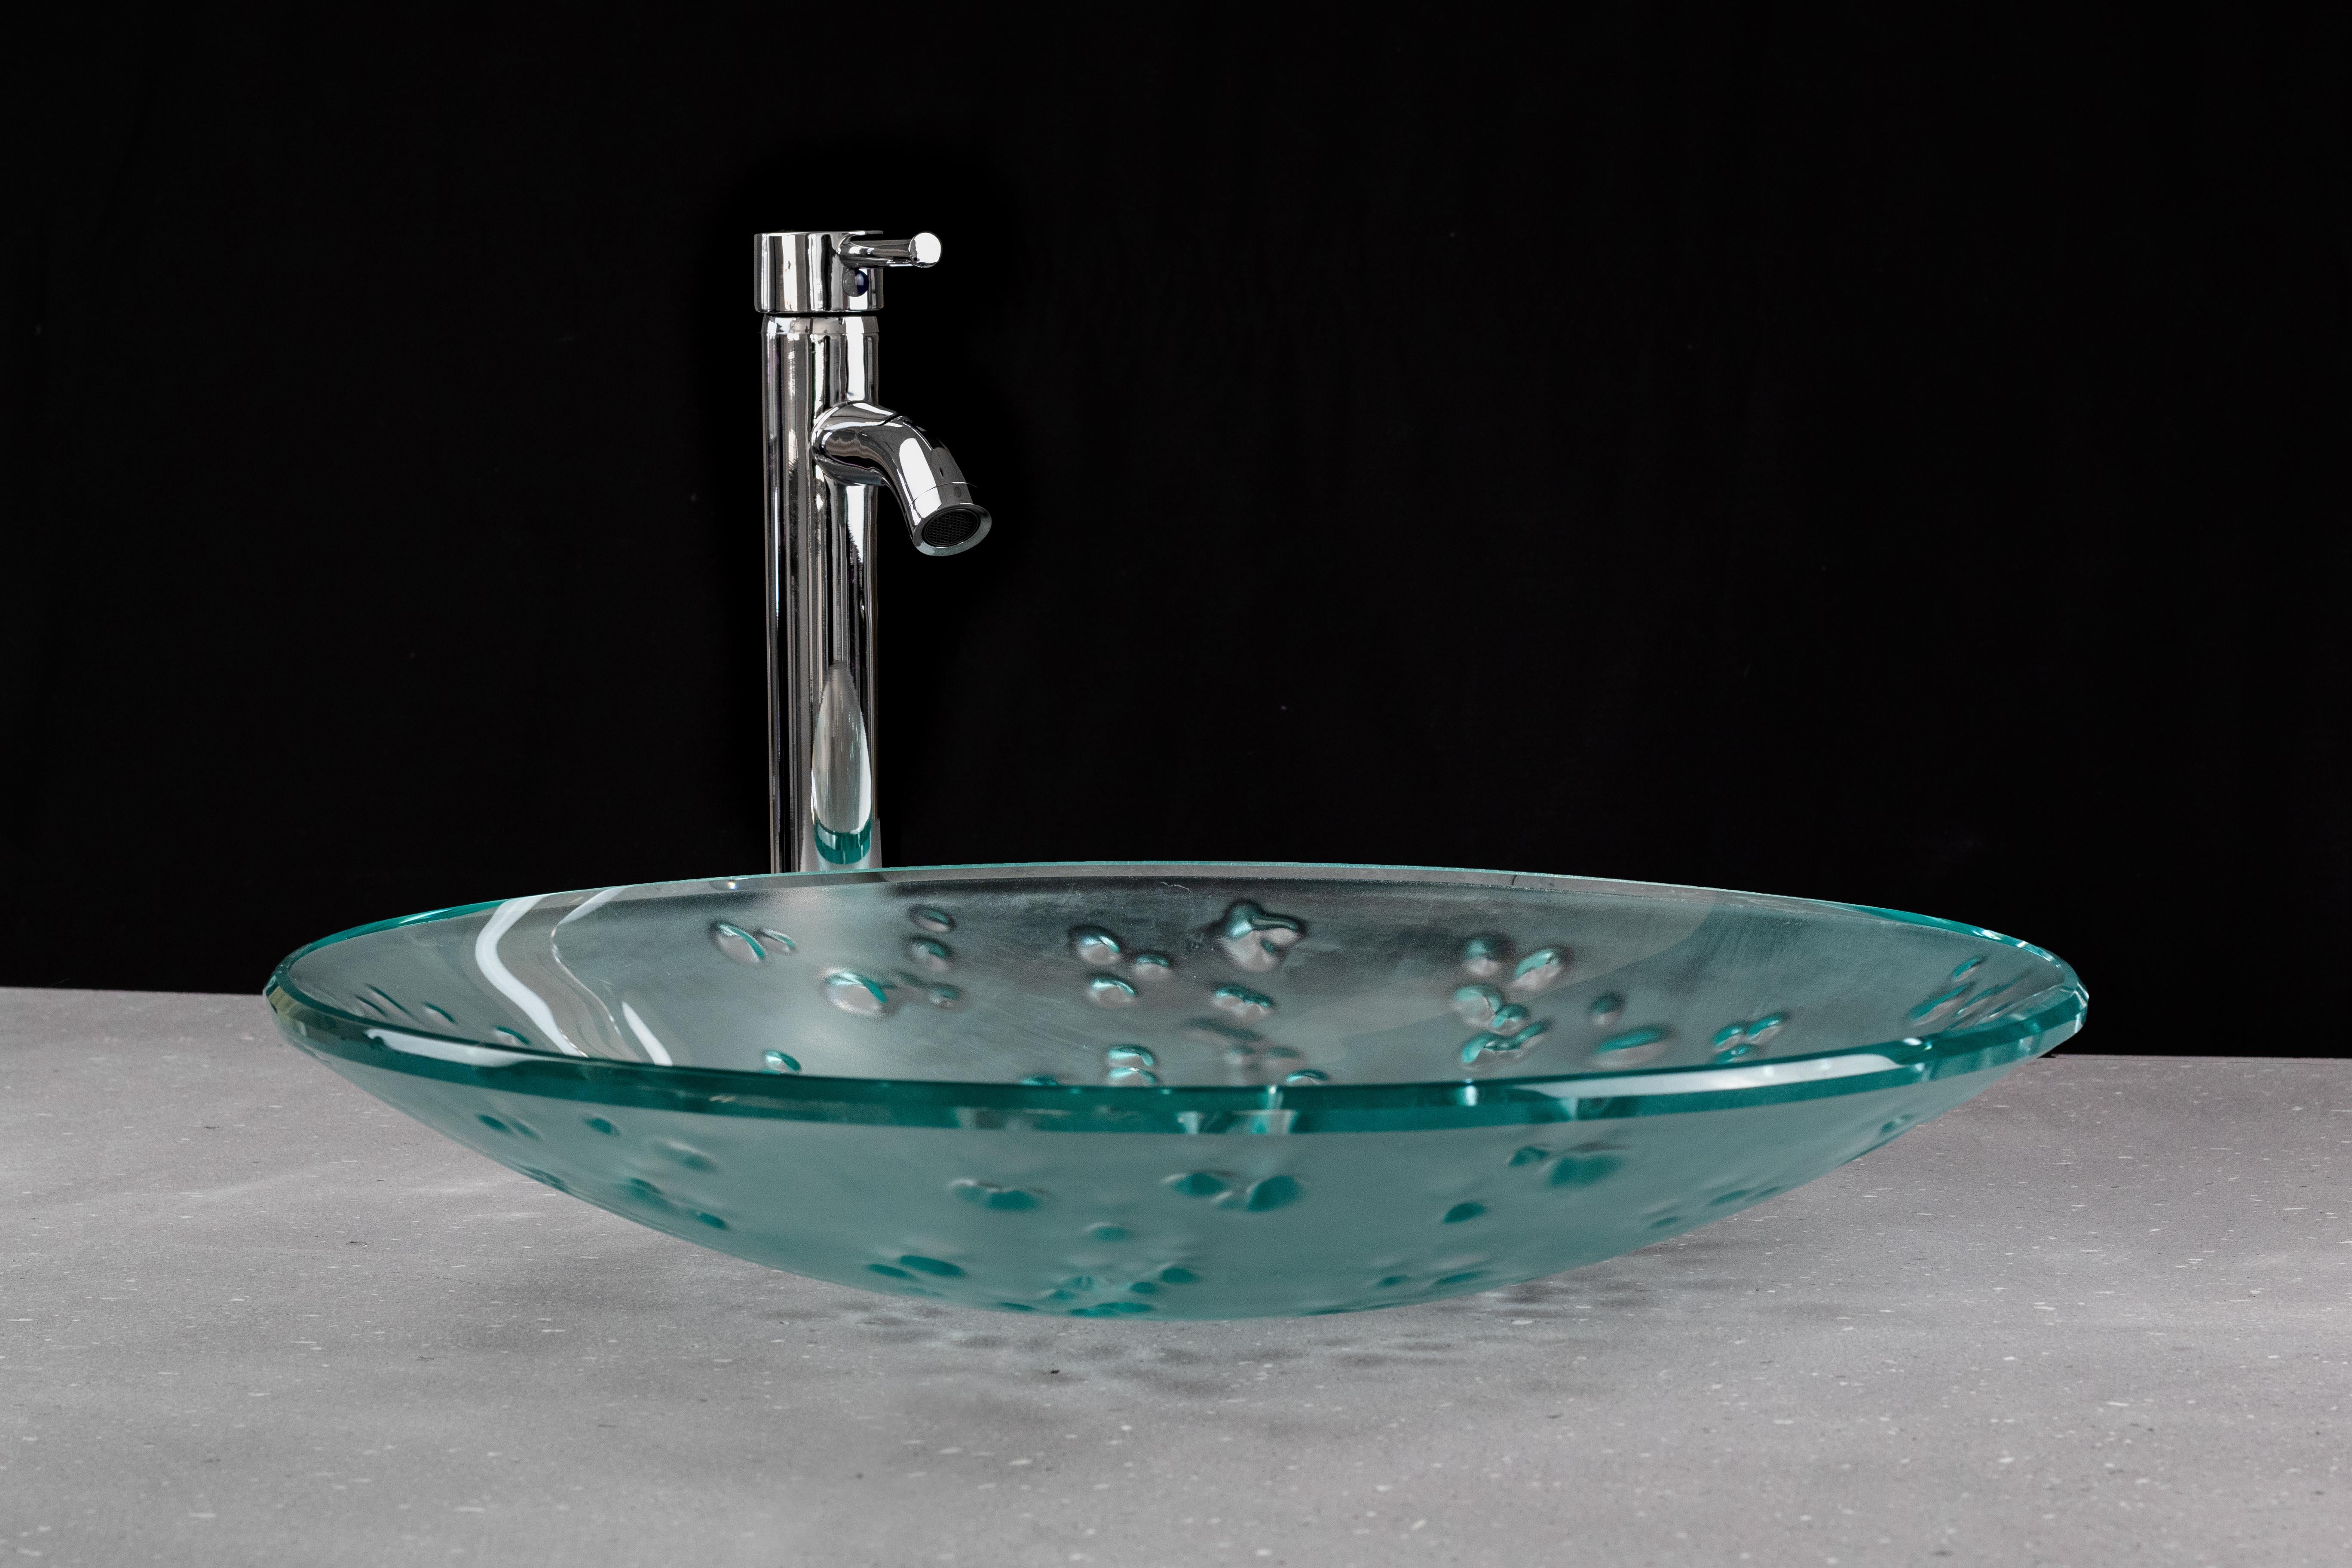 Bel Ava Washbasin by Studio Nosqua
Dimensions: D 52 x W 52 x H 93 cm
Material: Glass.
Basin drain not included. 

Between desertic expanses and frozen mountains, Bela Ava offers you to travel towards fascinating landscapes.
This sink uses the same